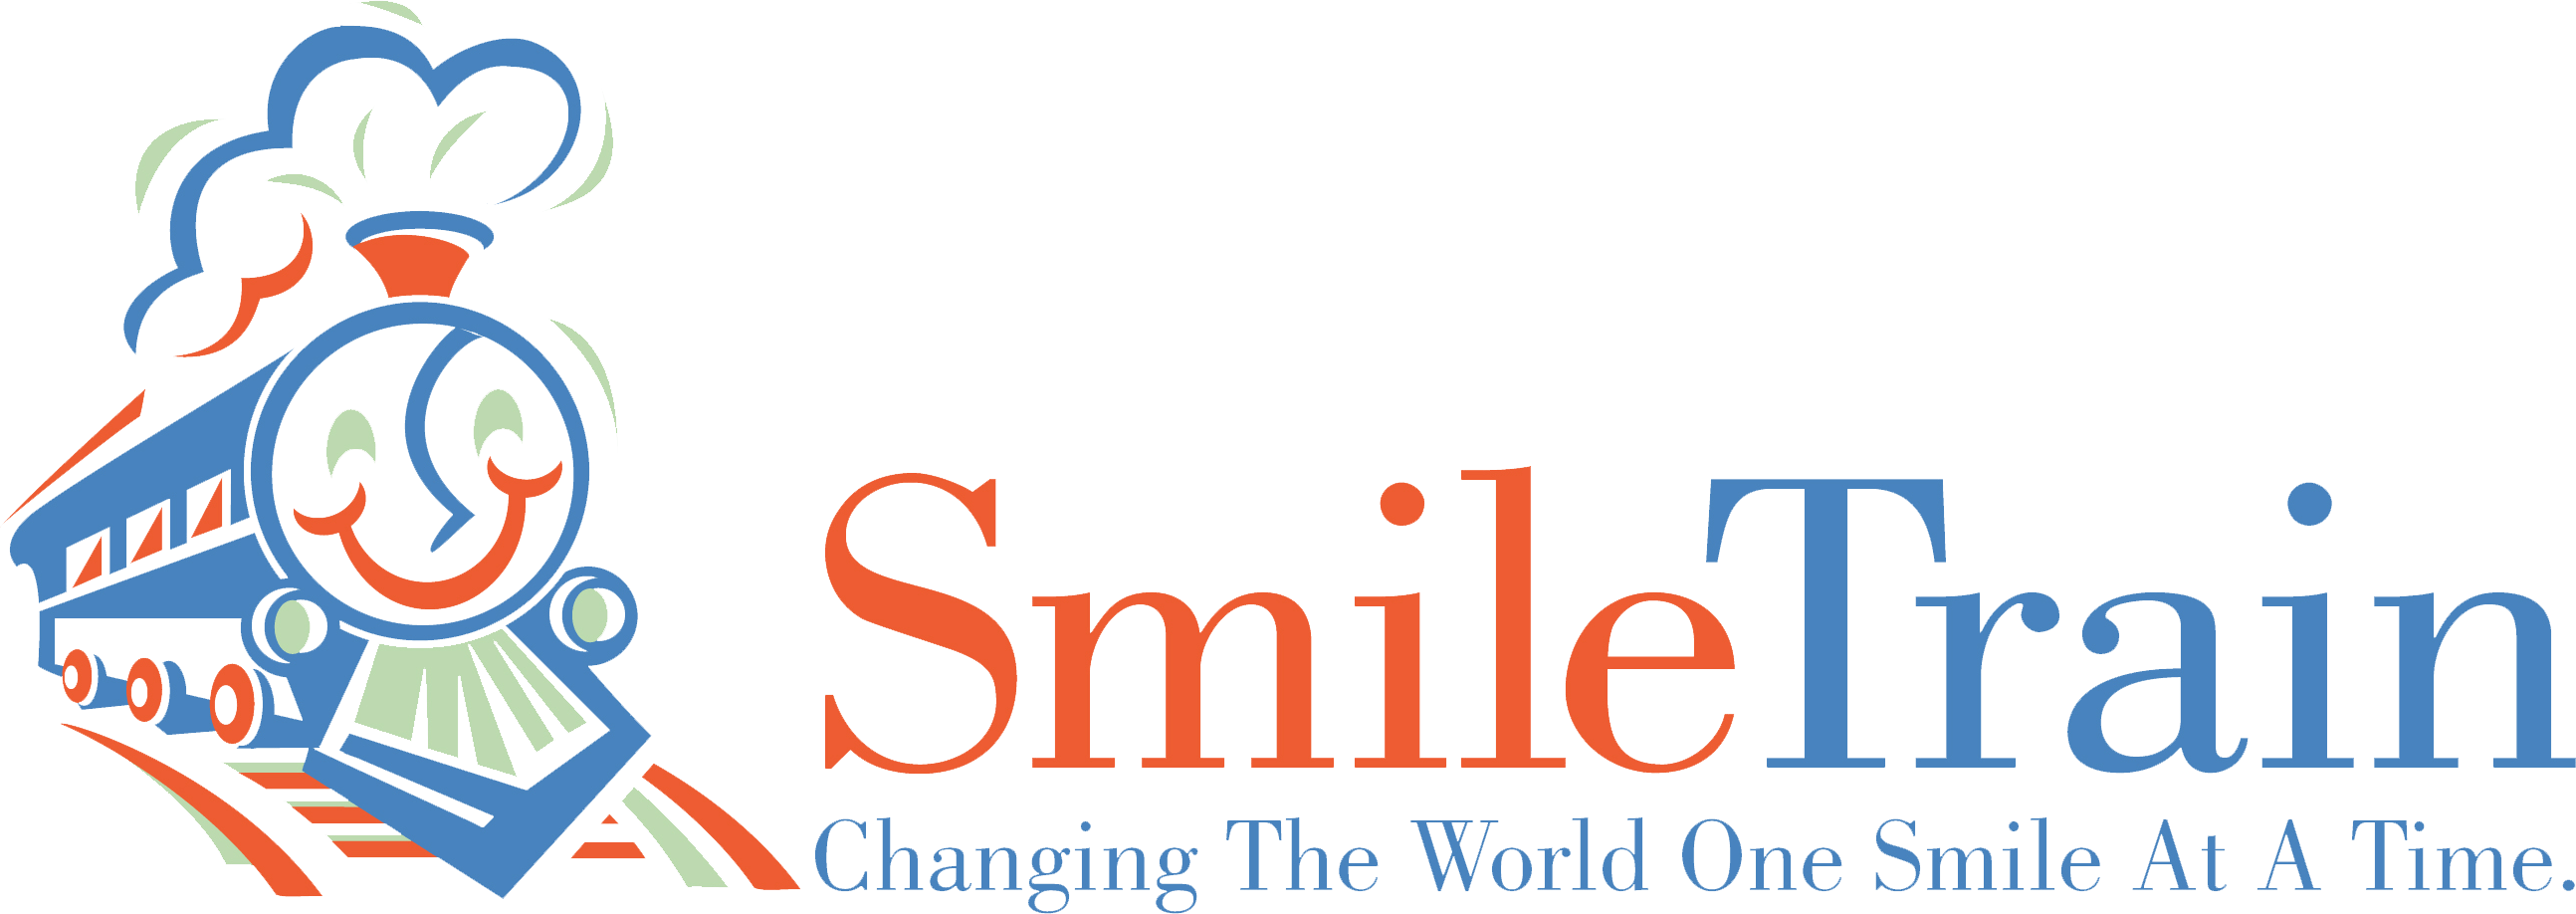 Smile Train Logo - Why We Support Smile Train - Alyshaan Fine Rugs